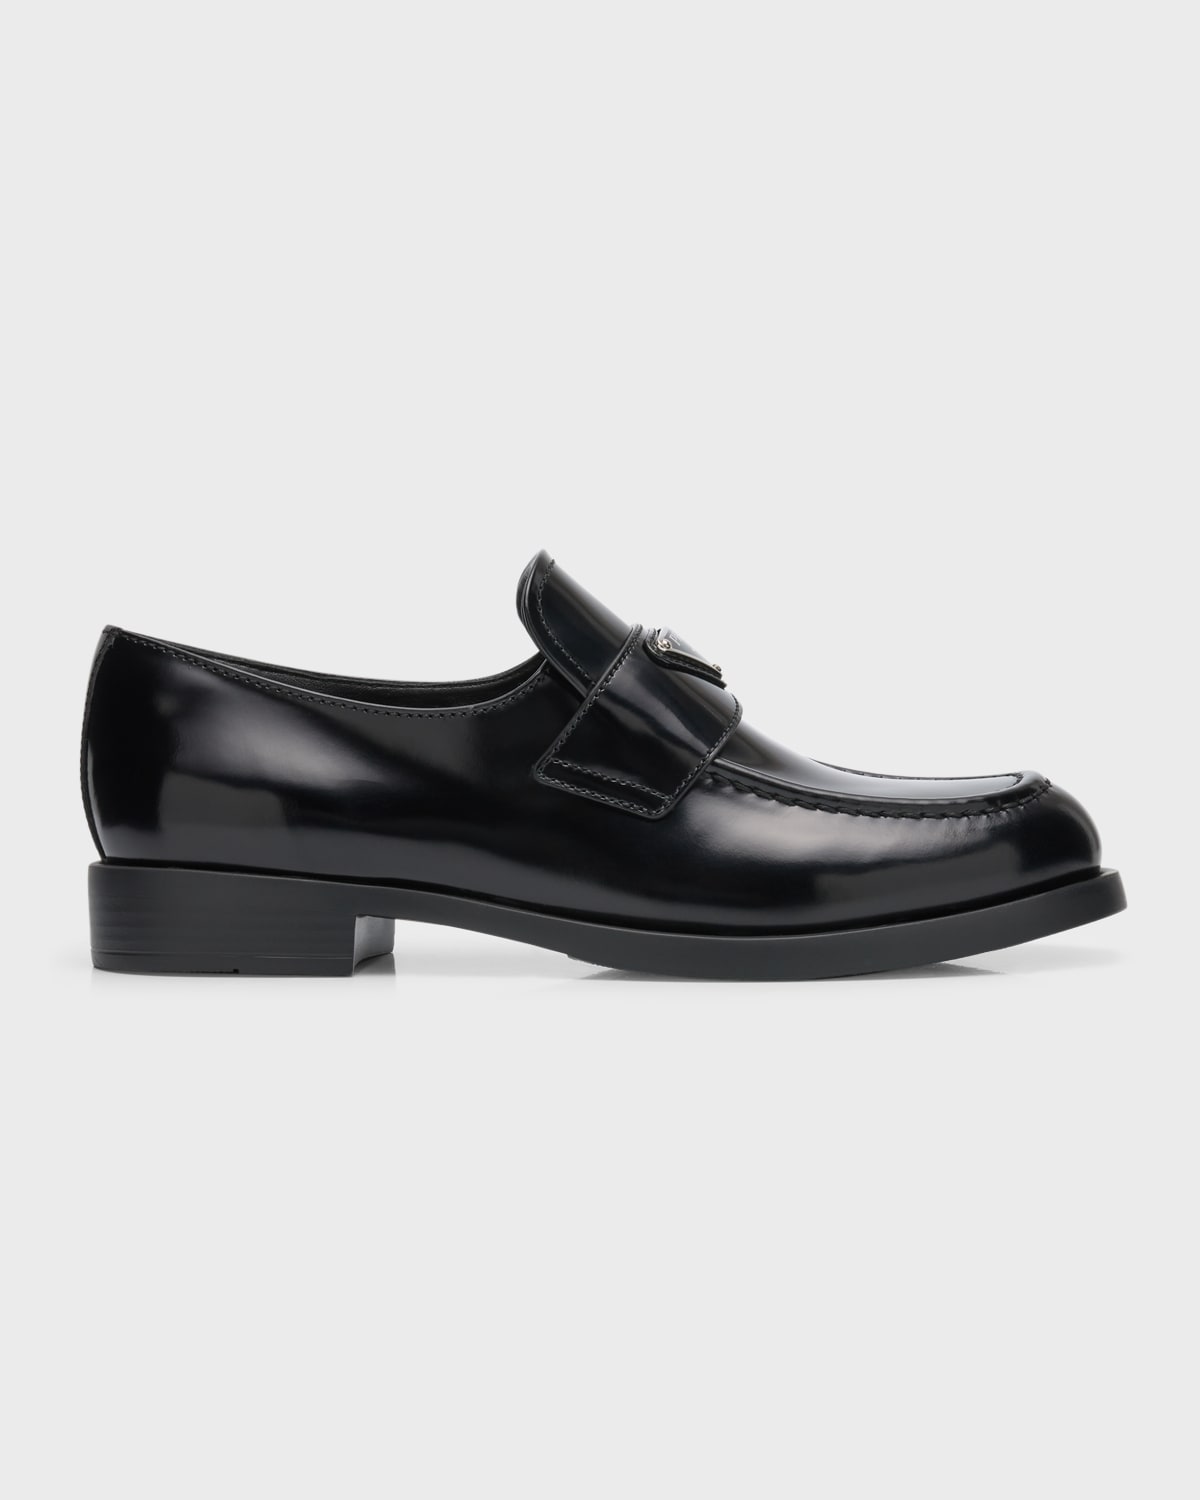 Leather Slip-On Flat Loafers